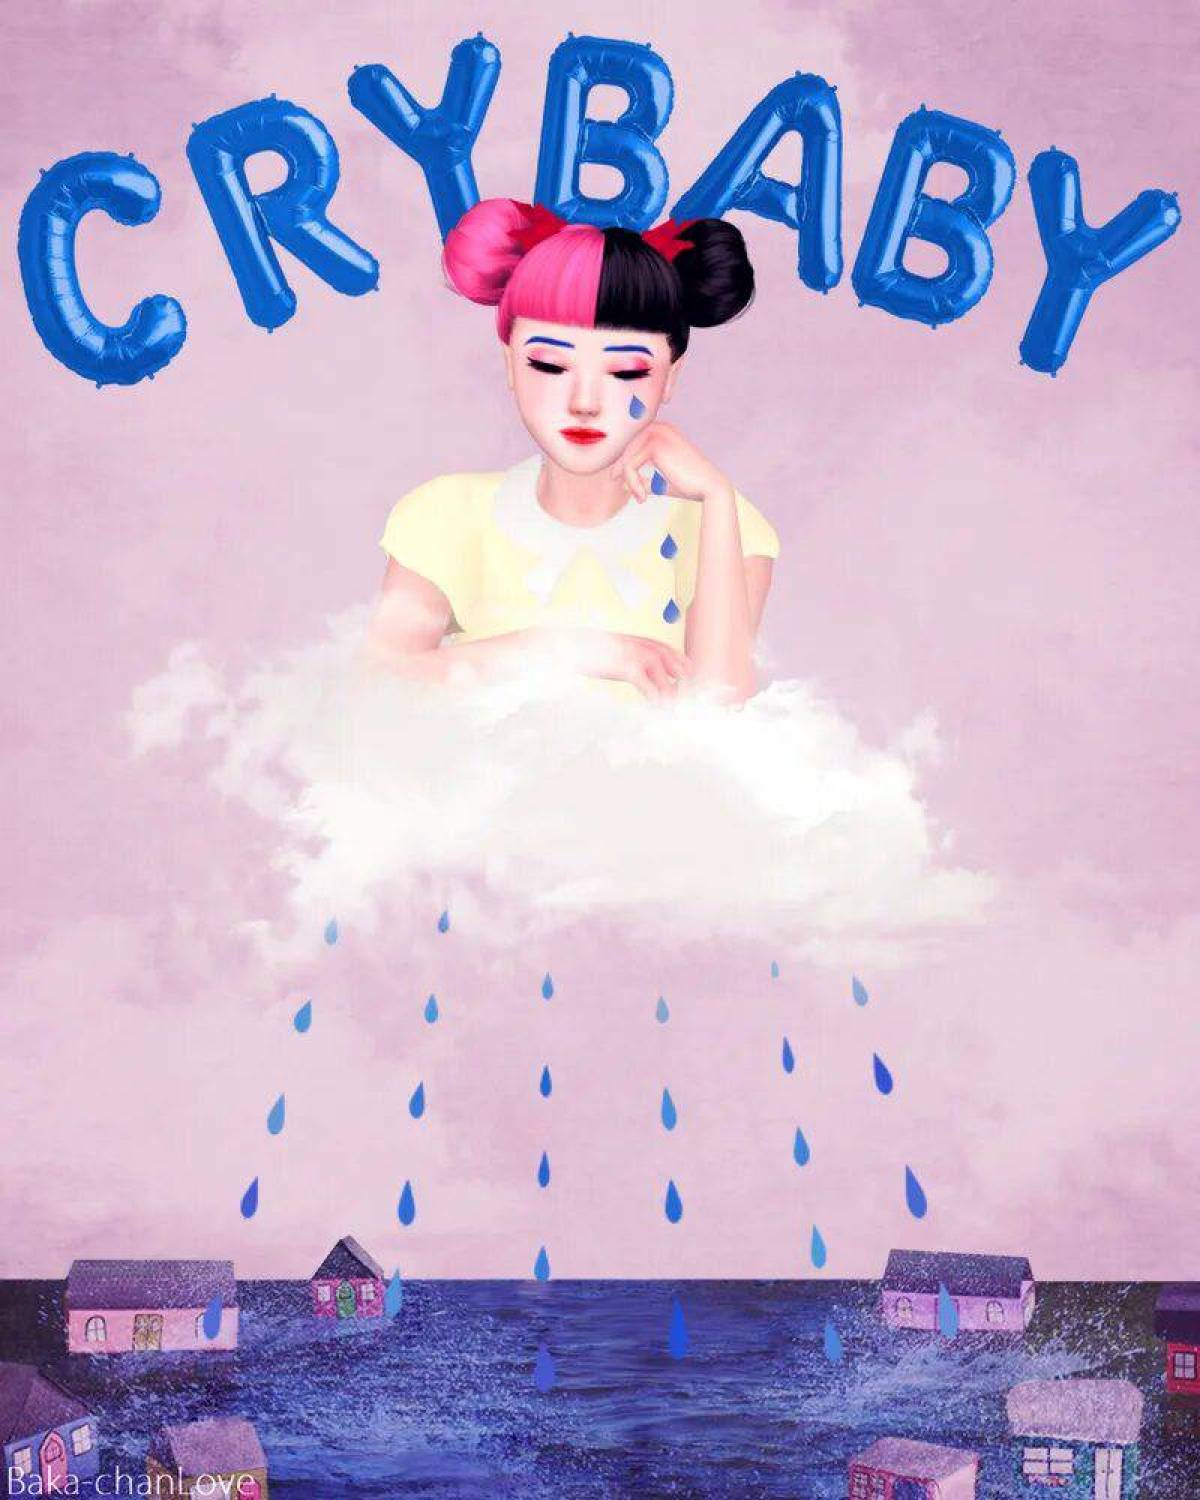 Crybaby #4